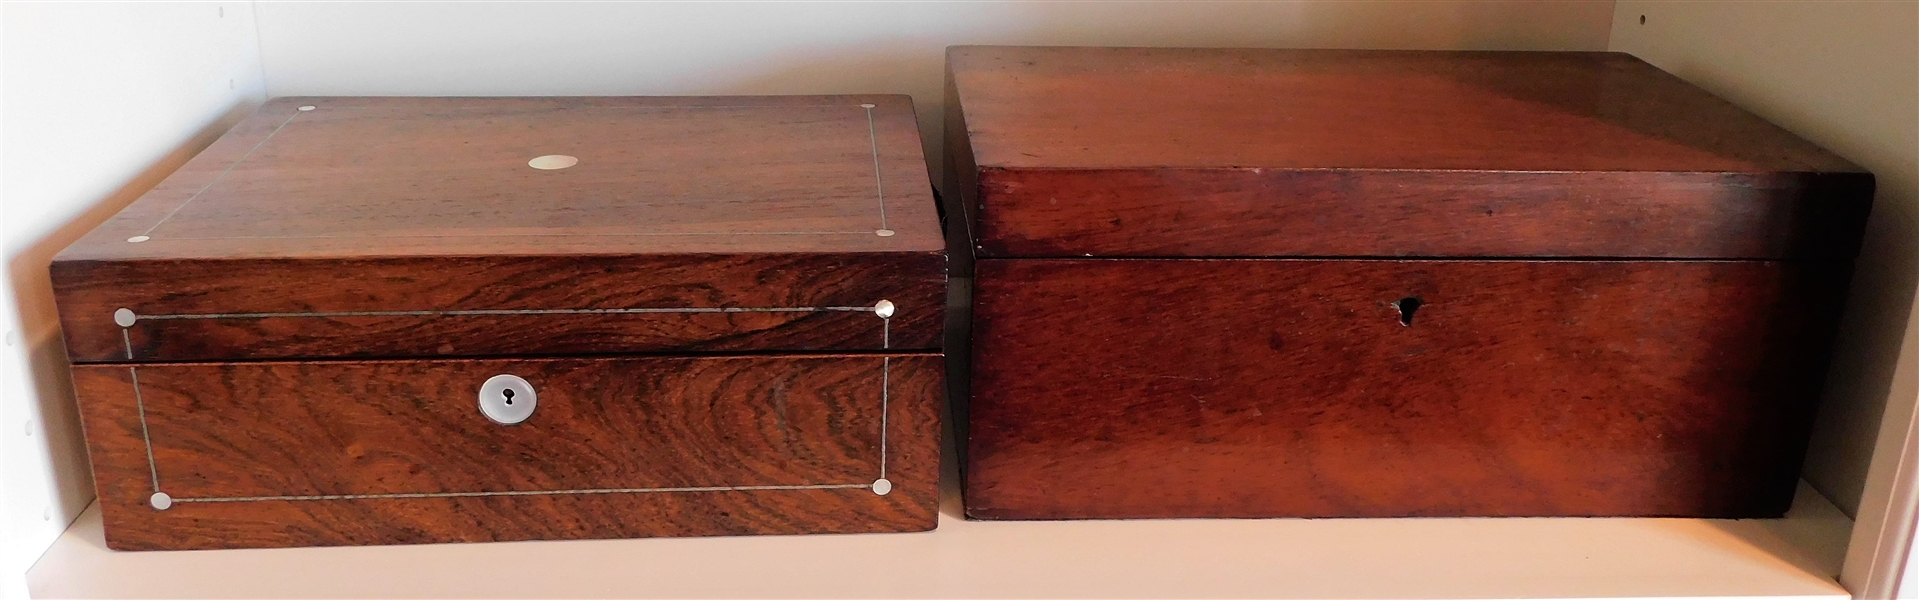 2 Wooden Document Boxes - I with Mother of Pearl Inlay - Some Veneer Damage, Other Velvet Lined Measures 5" 12" by 7"